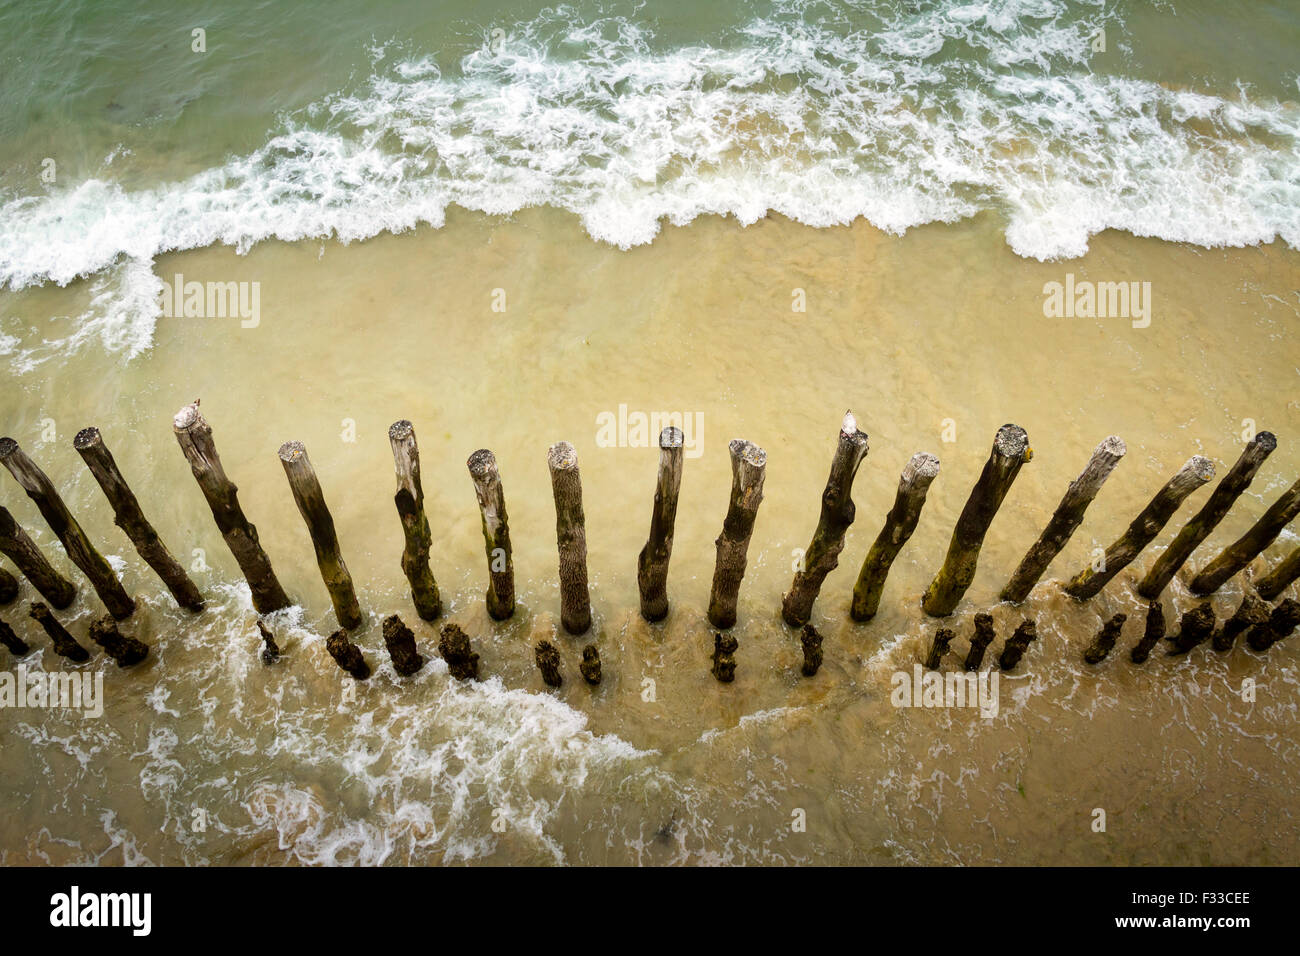 Barrier of wooden posts on a beach, Saint Malo, France, Europe Stock Photo